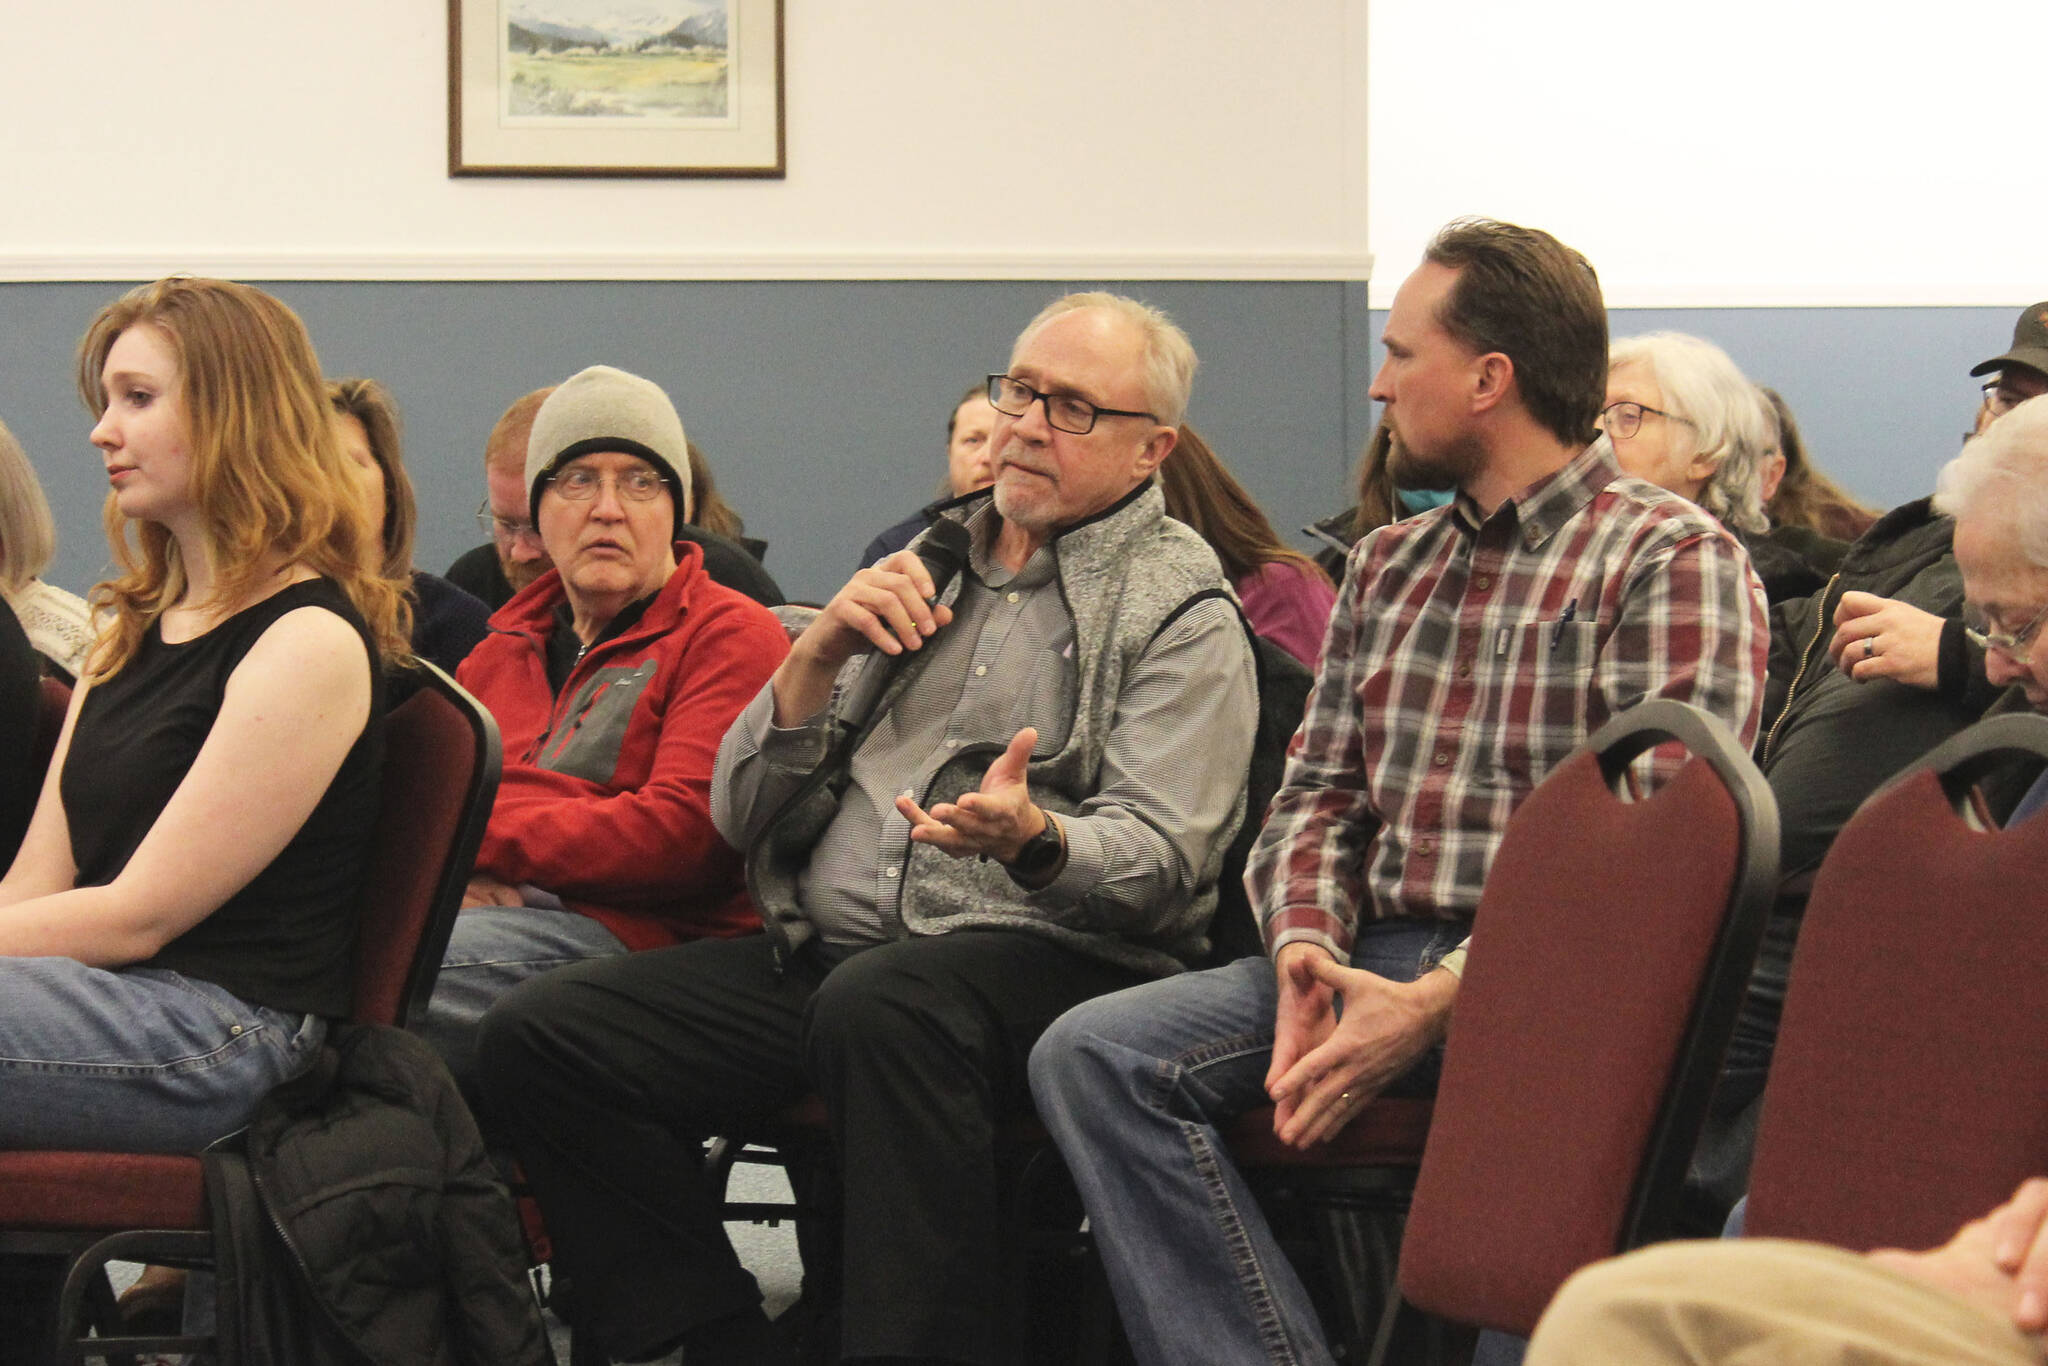 Peninsula Community Health Services CEO Ben Wright speaks during a community town hall on a cold weather shelter in Nikiski on Wednesday, Dec. 15, 2021 in Nikiski, Alaska. (Ashlyn O’Hara/Peninsula Clarion)